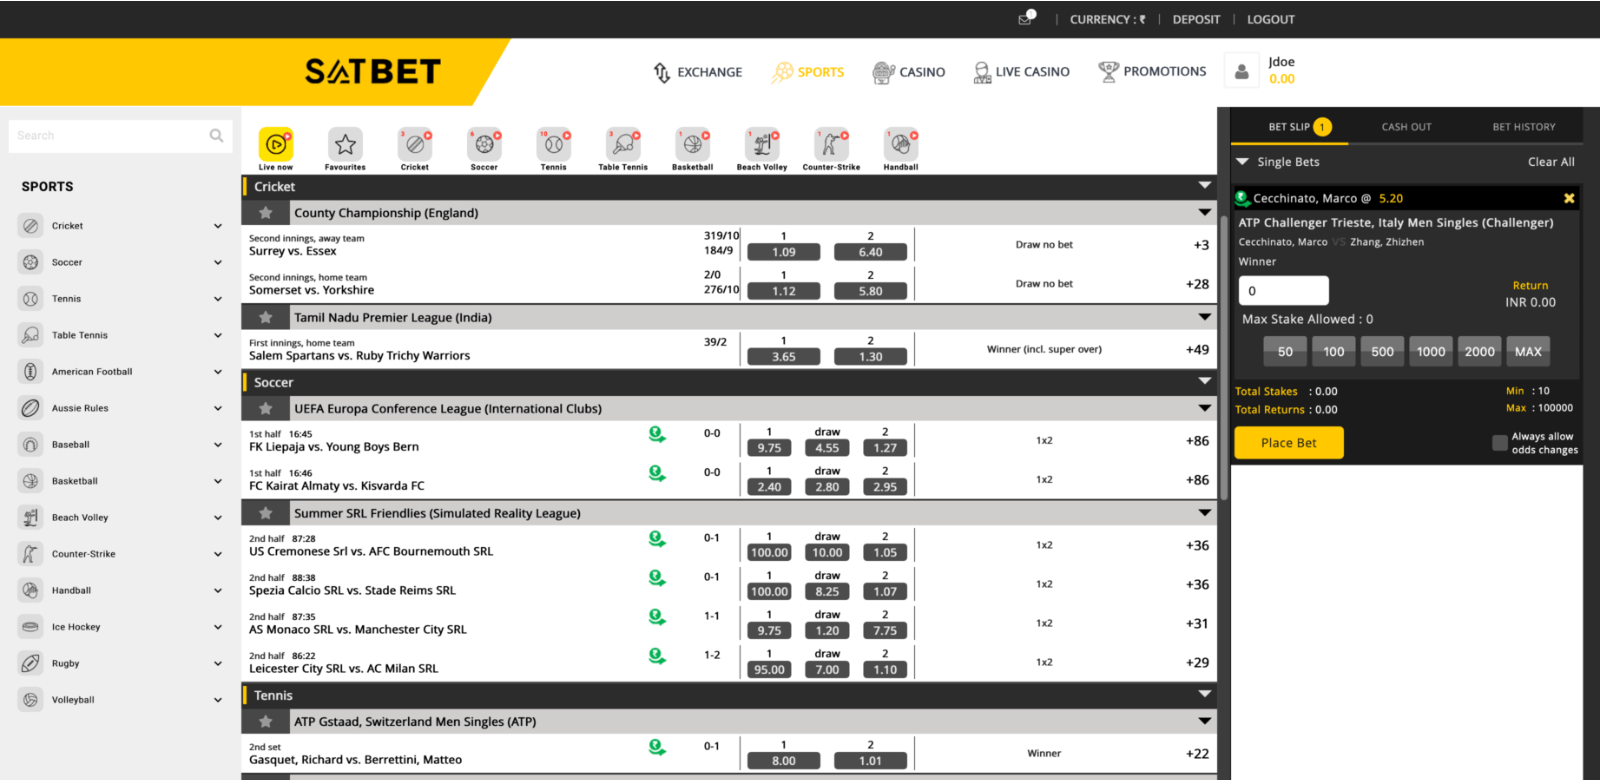 Sports betting page at the Satbet website